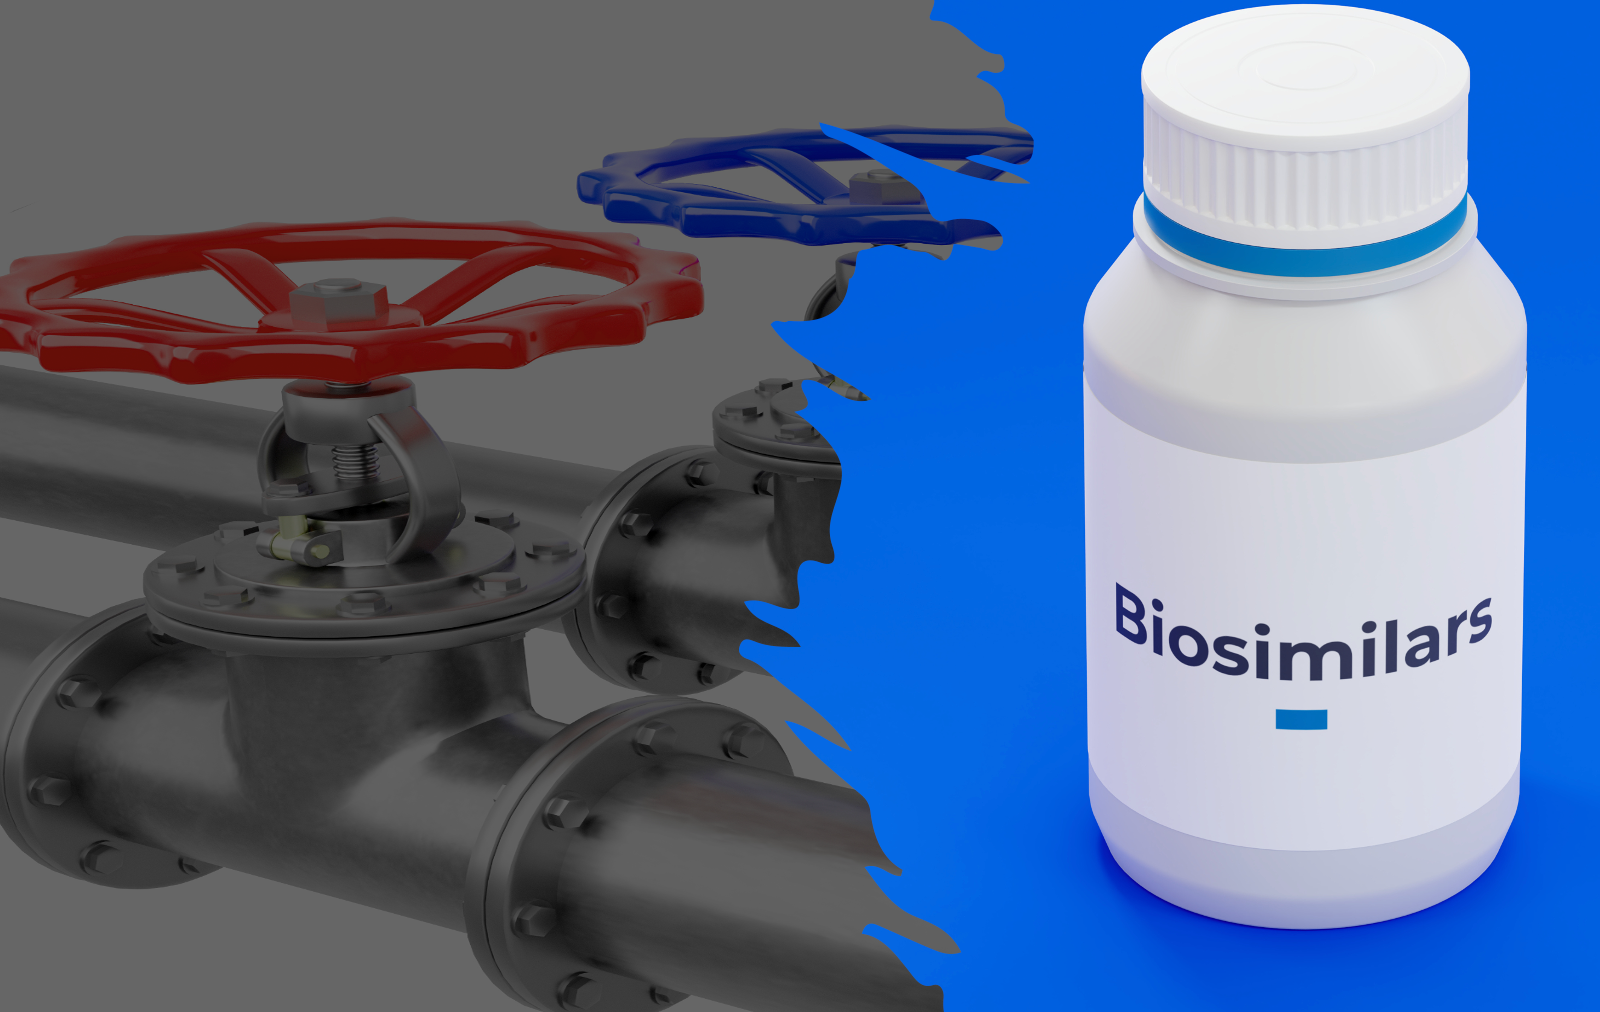 Over 50 Biosimilars in 10 years — and the Pipeline is Still Full